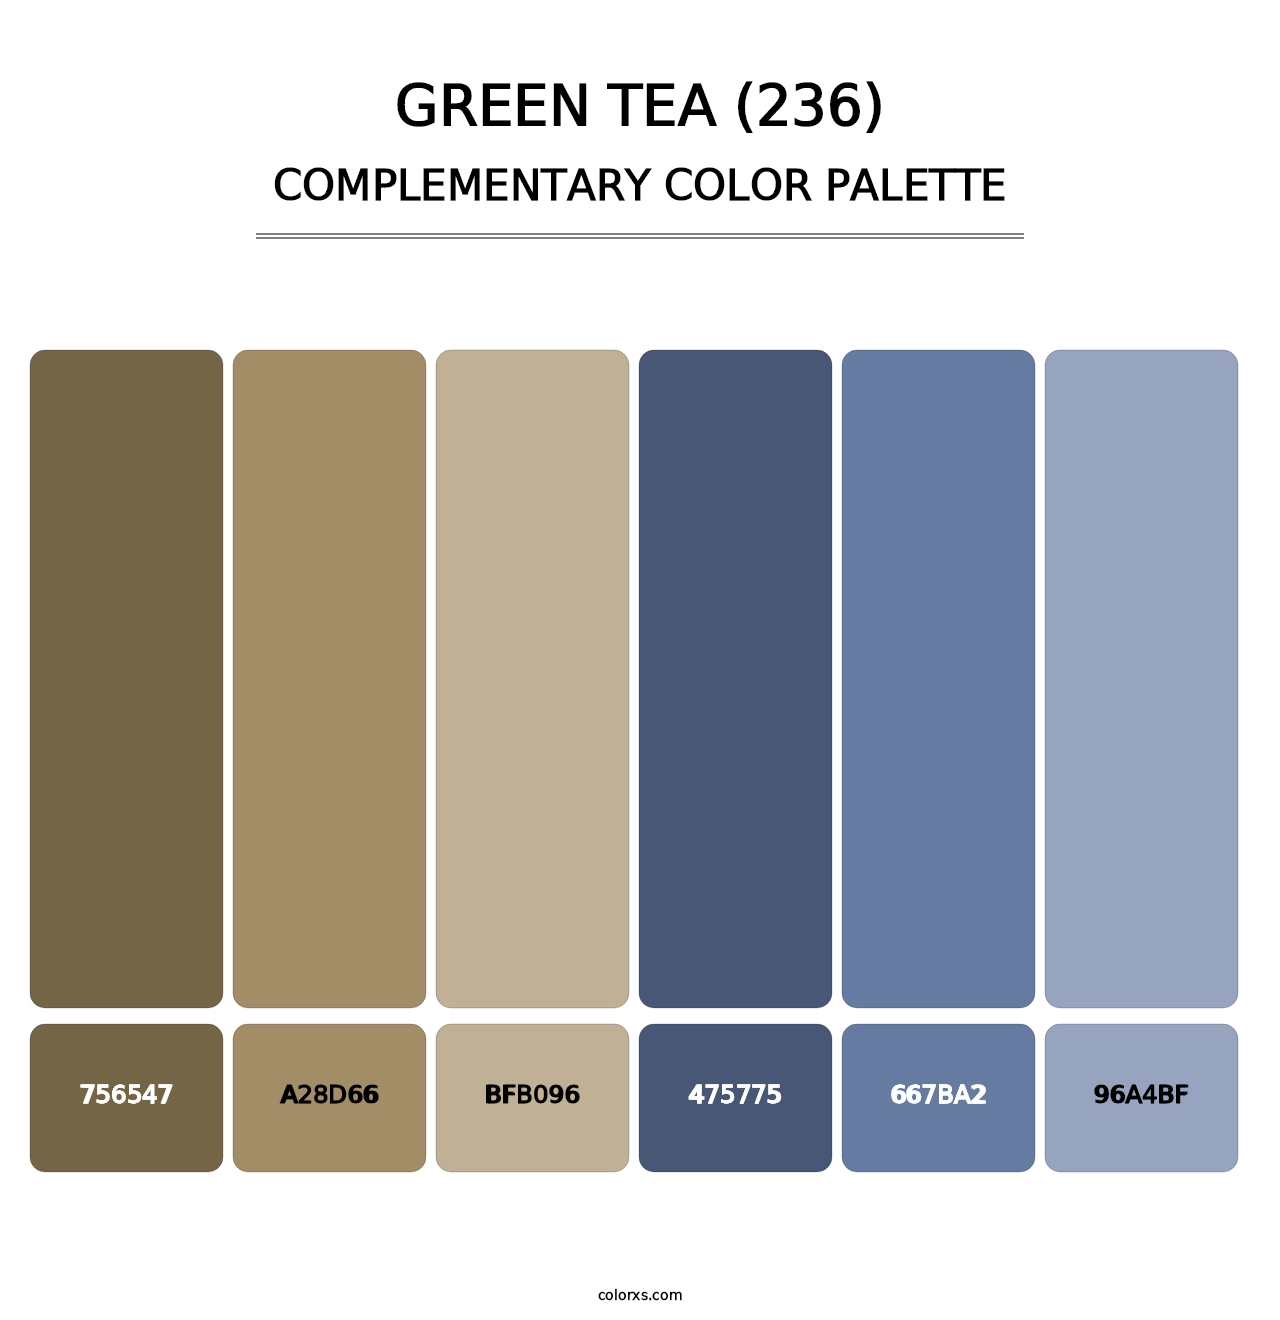 Green Tea (236) - Complementary Color Palette